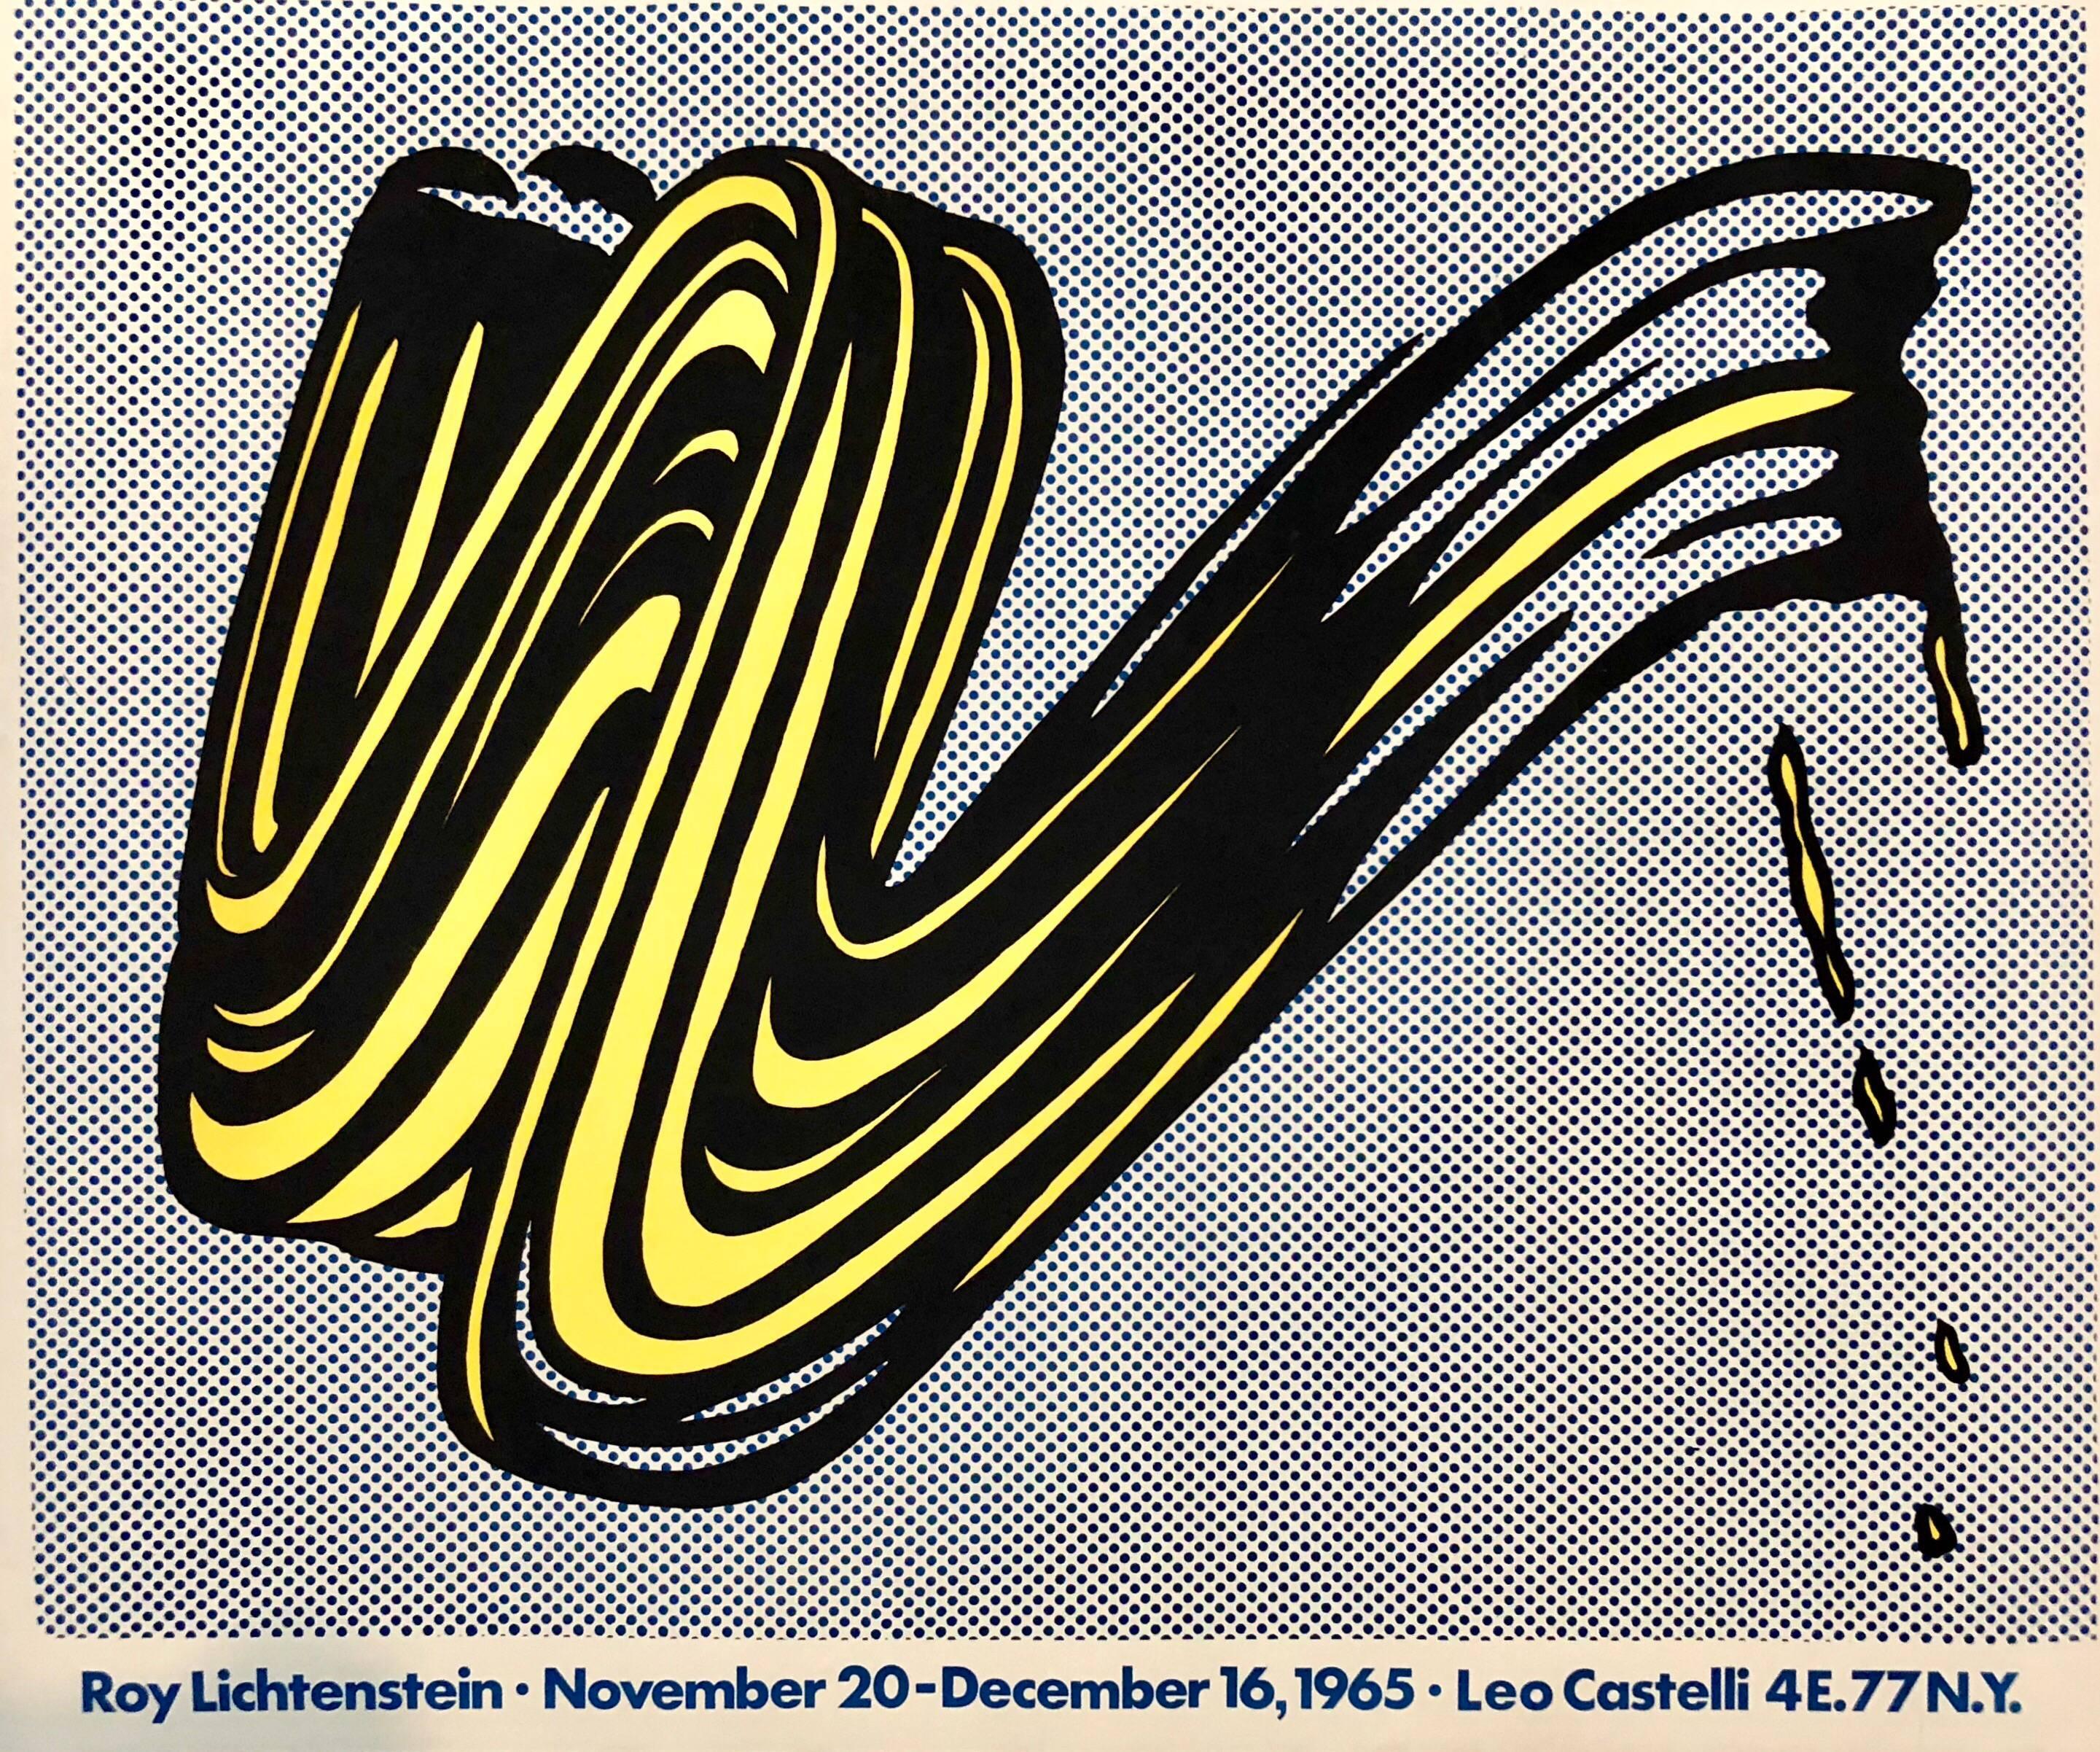 This is a offset lithograph in colors. it is a beautiful piece in nice condition. this is not signed in pencil.
Pop art artist, Roy Lichtenstein Born October 27, 1923 in New York City  
At the age of 14 in 1937 Lichtenstein begins watercolor classes